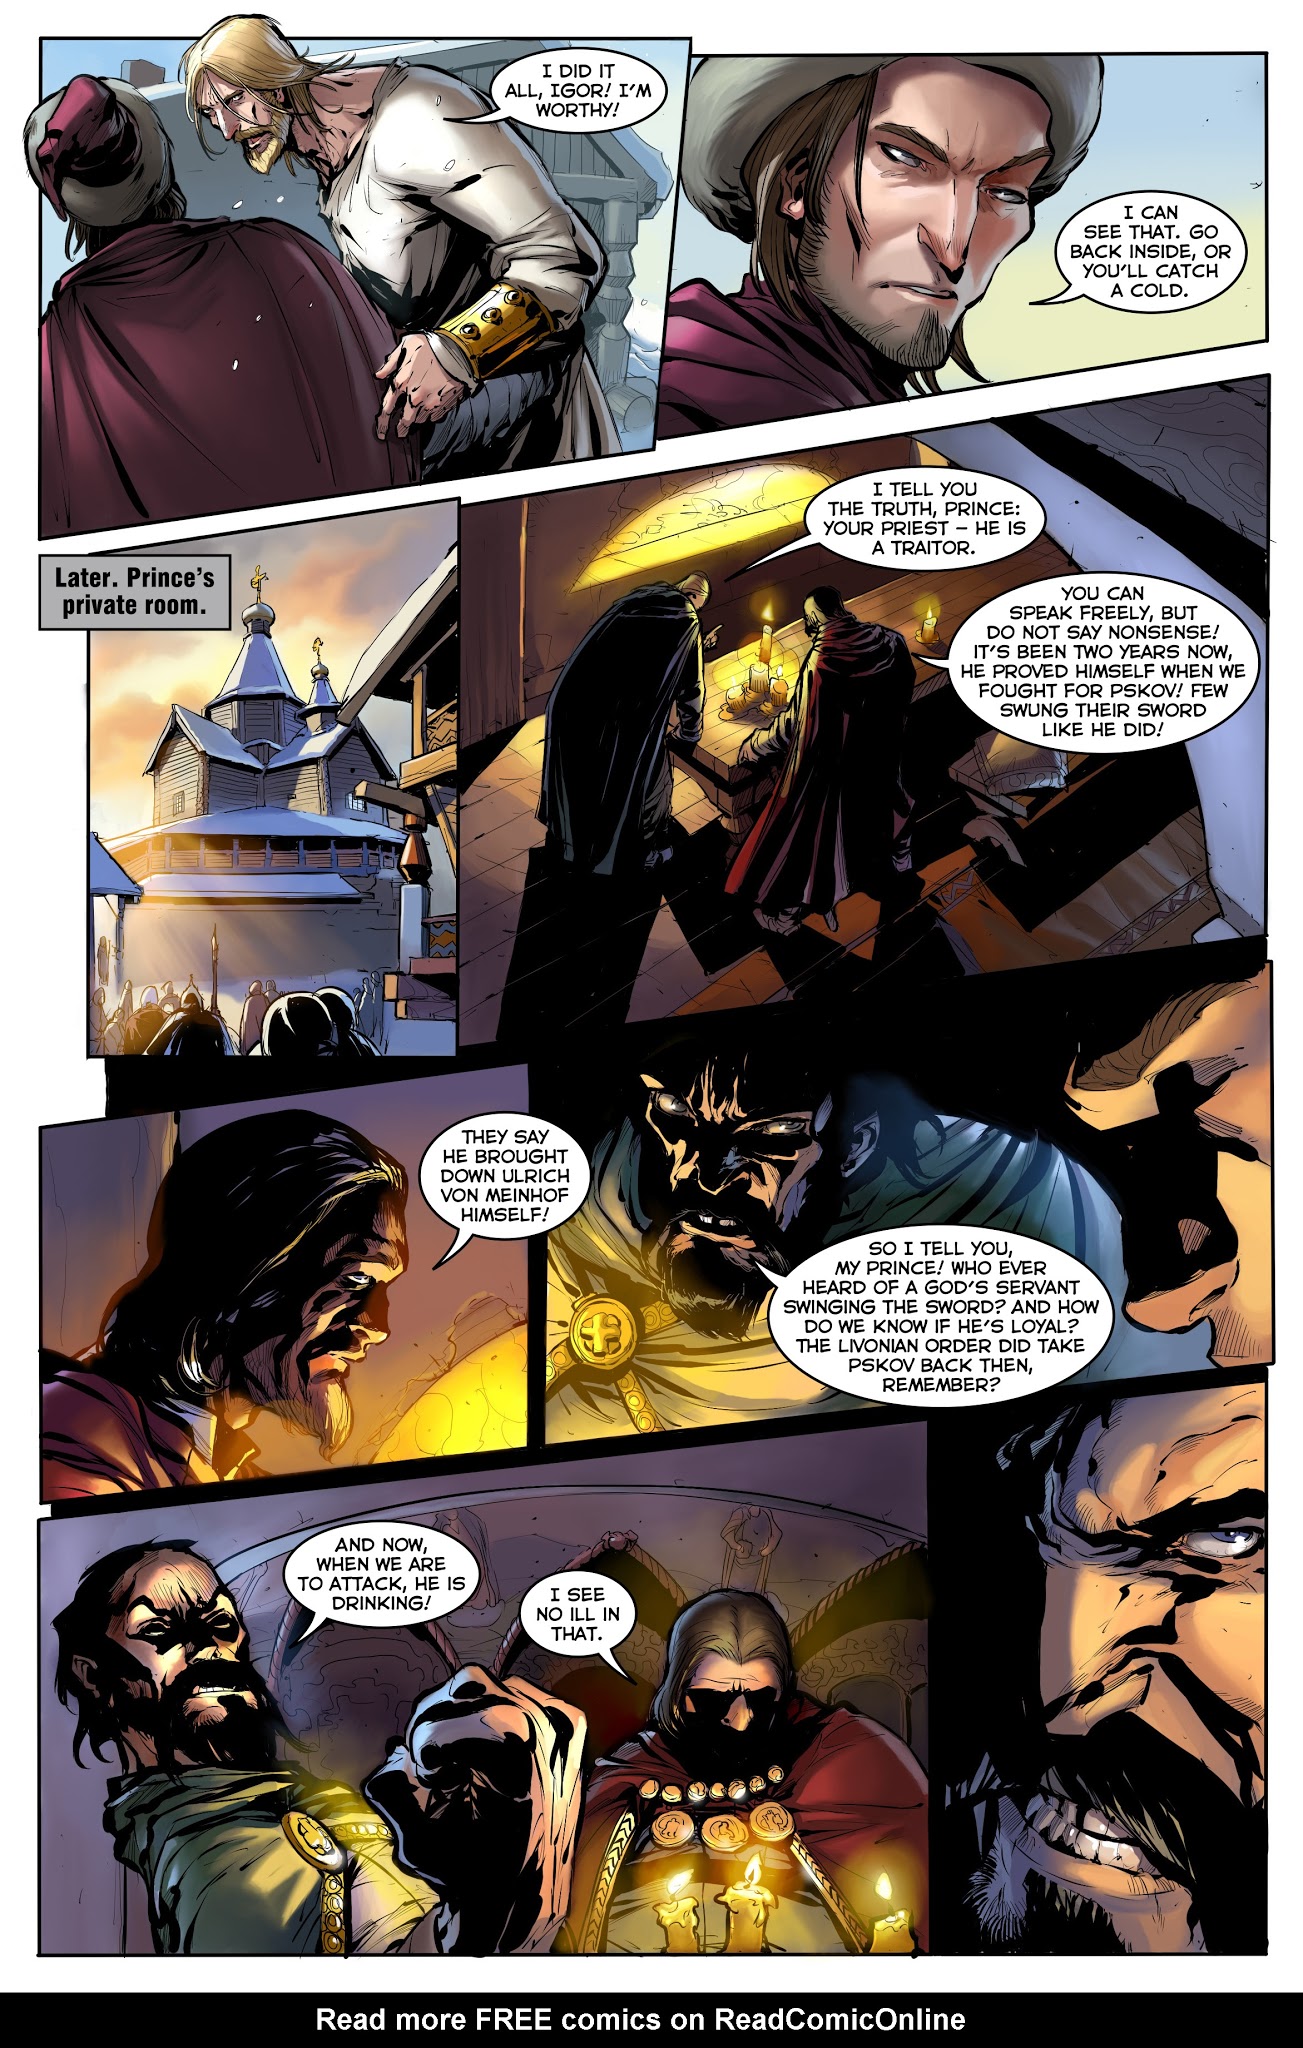 Read online Friar comic -  Issue #12 - 10